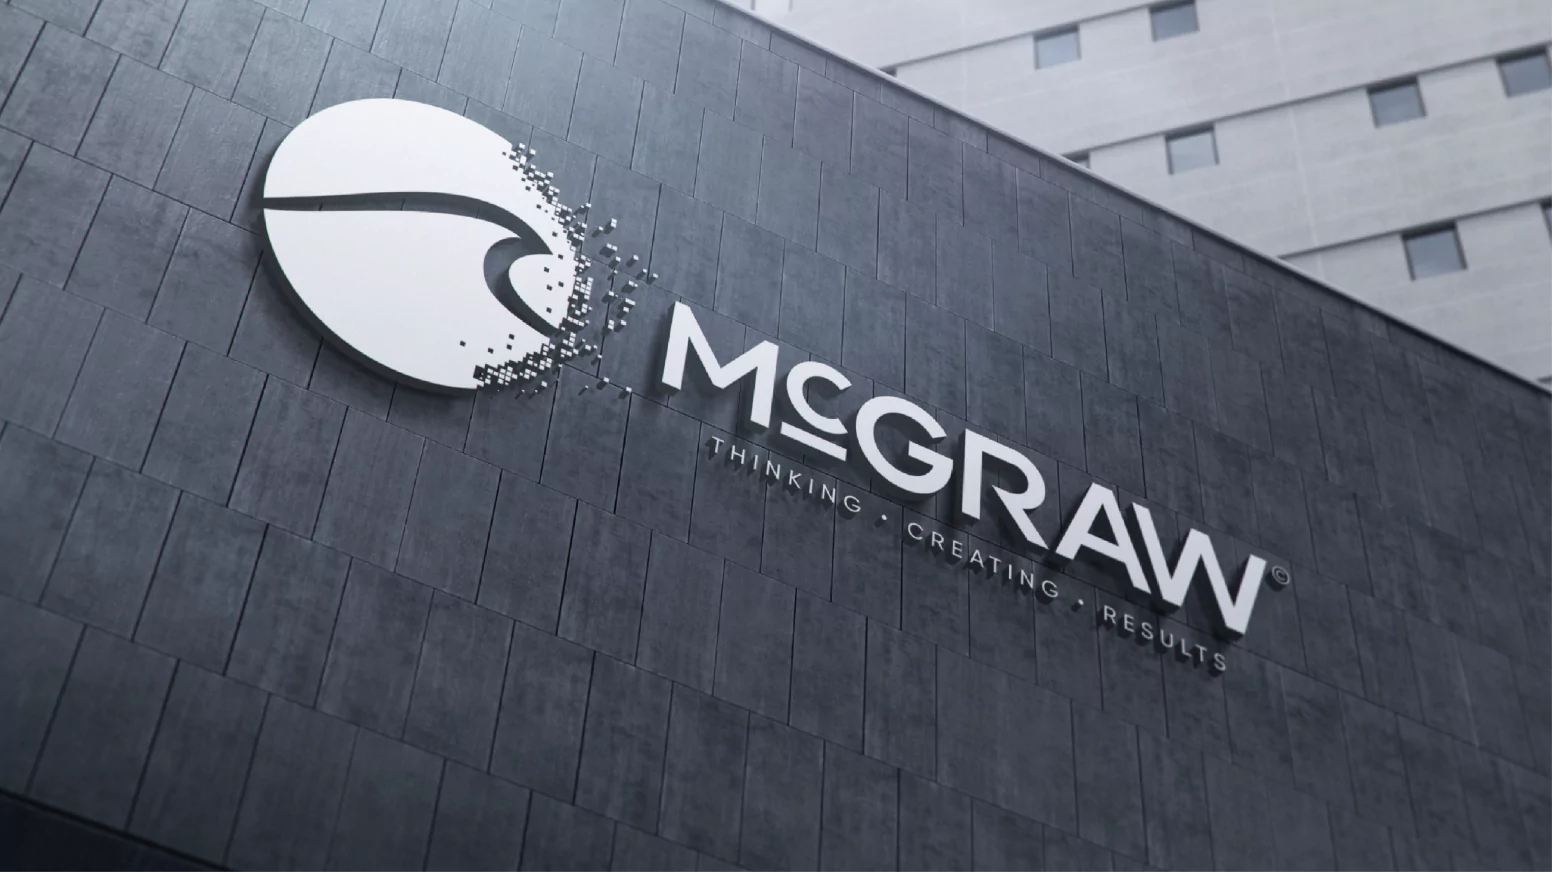 McGraw Collateral 01